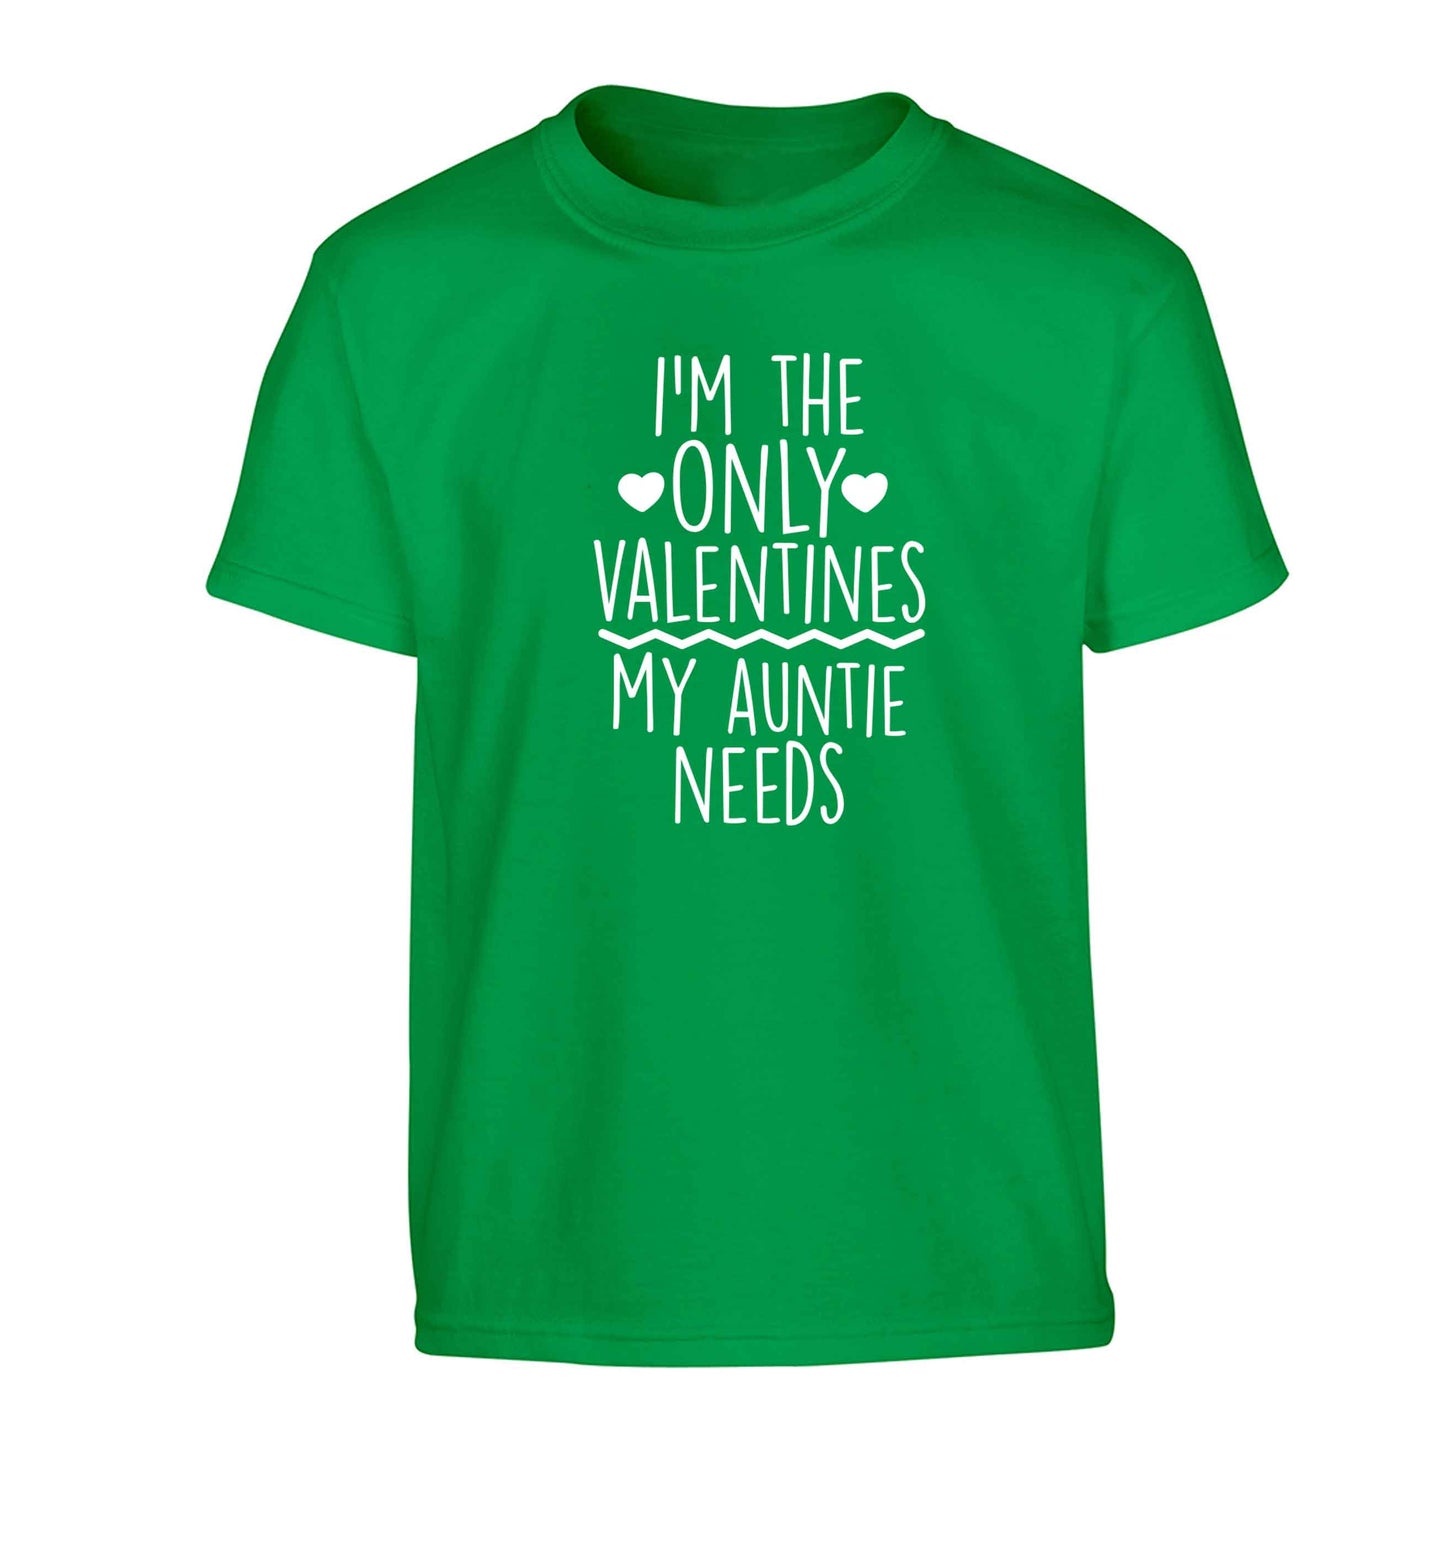 I'm the only valentines my auntie needs Children's green Tshirt 12-13 Years